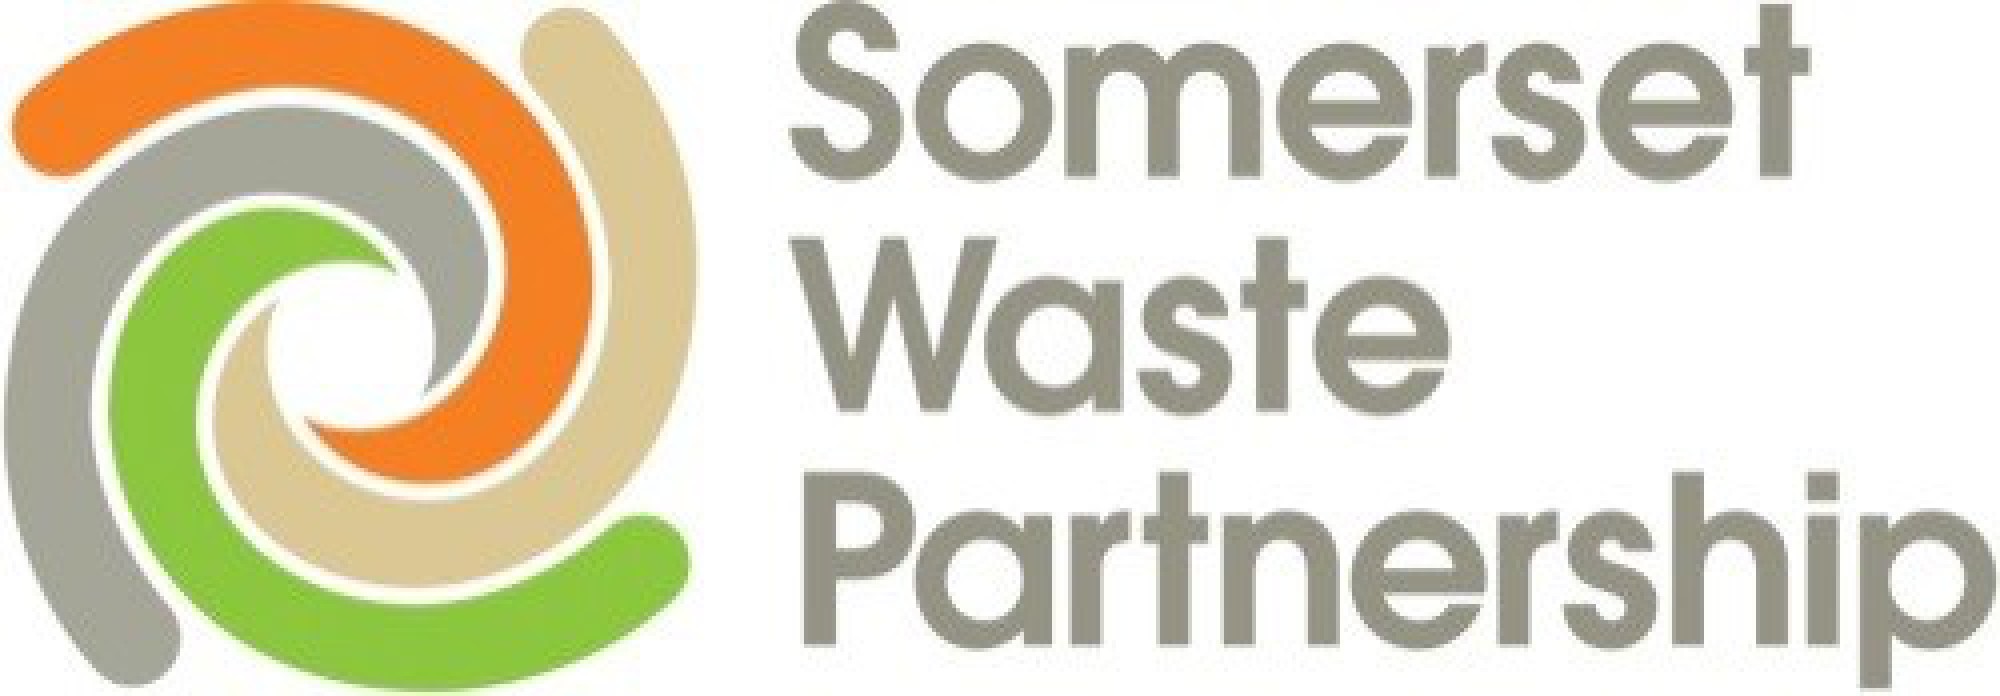 Somerset Waste Partnership, Recycle More information